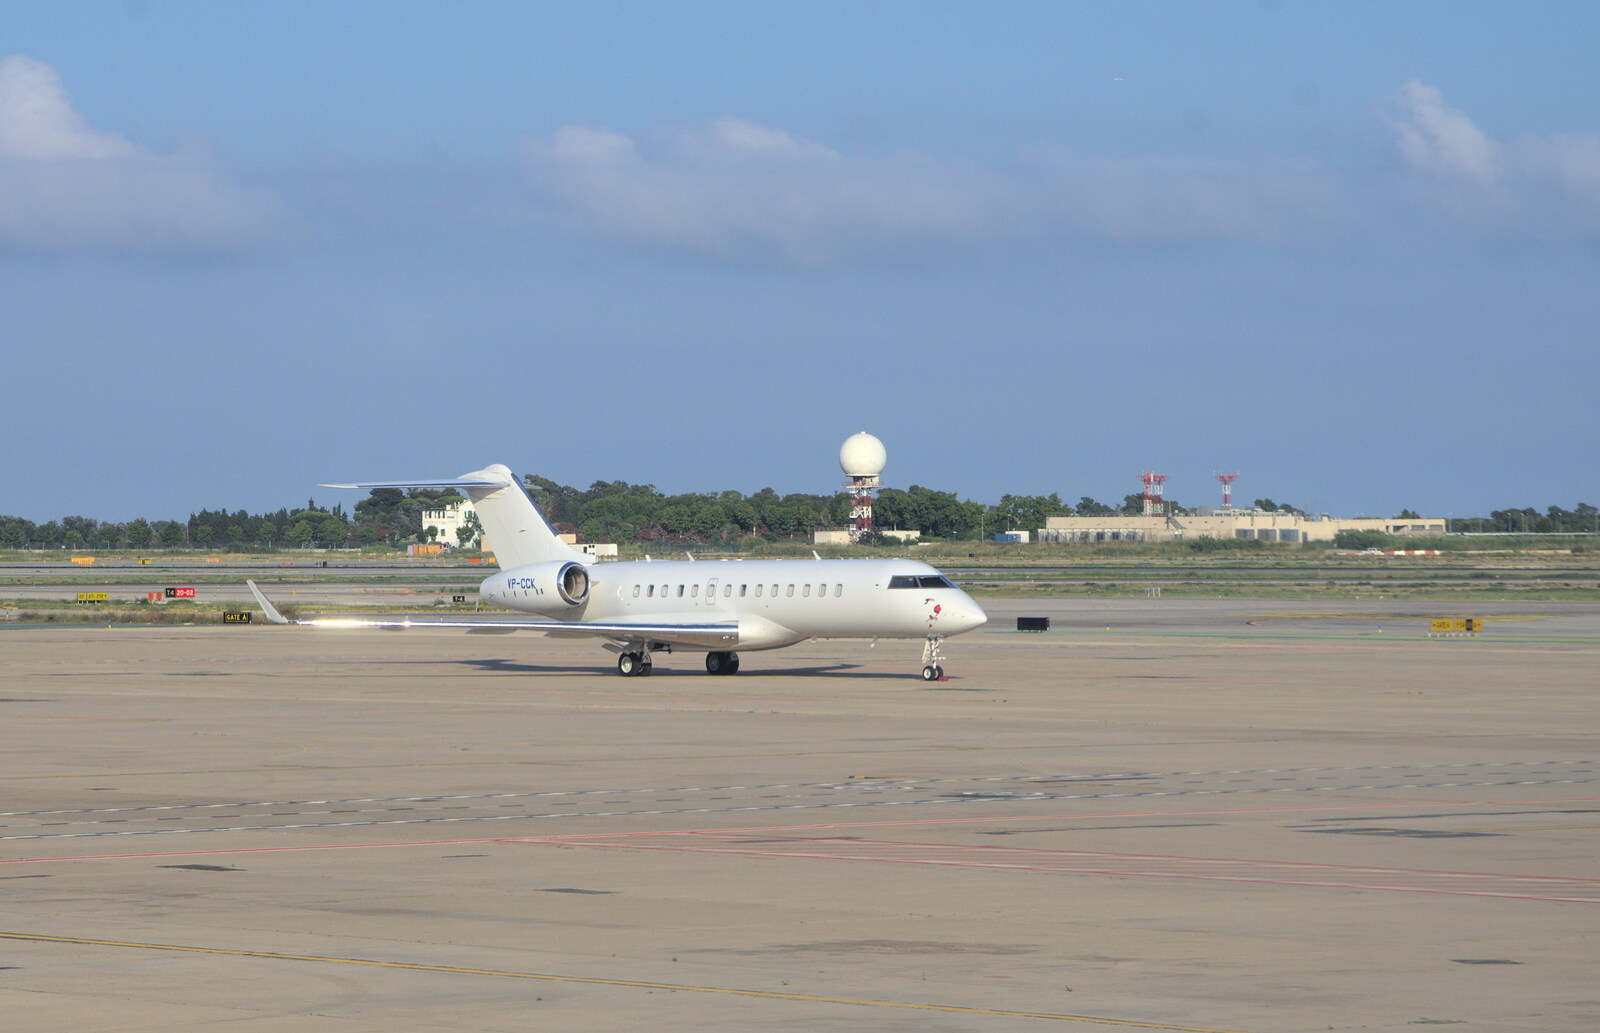 An executive jet comes in from The Open Education Challenge, Barcelona, Catalonia - 13th July 2014